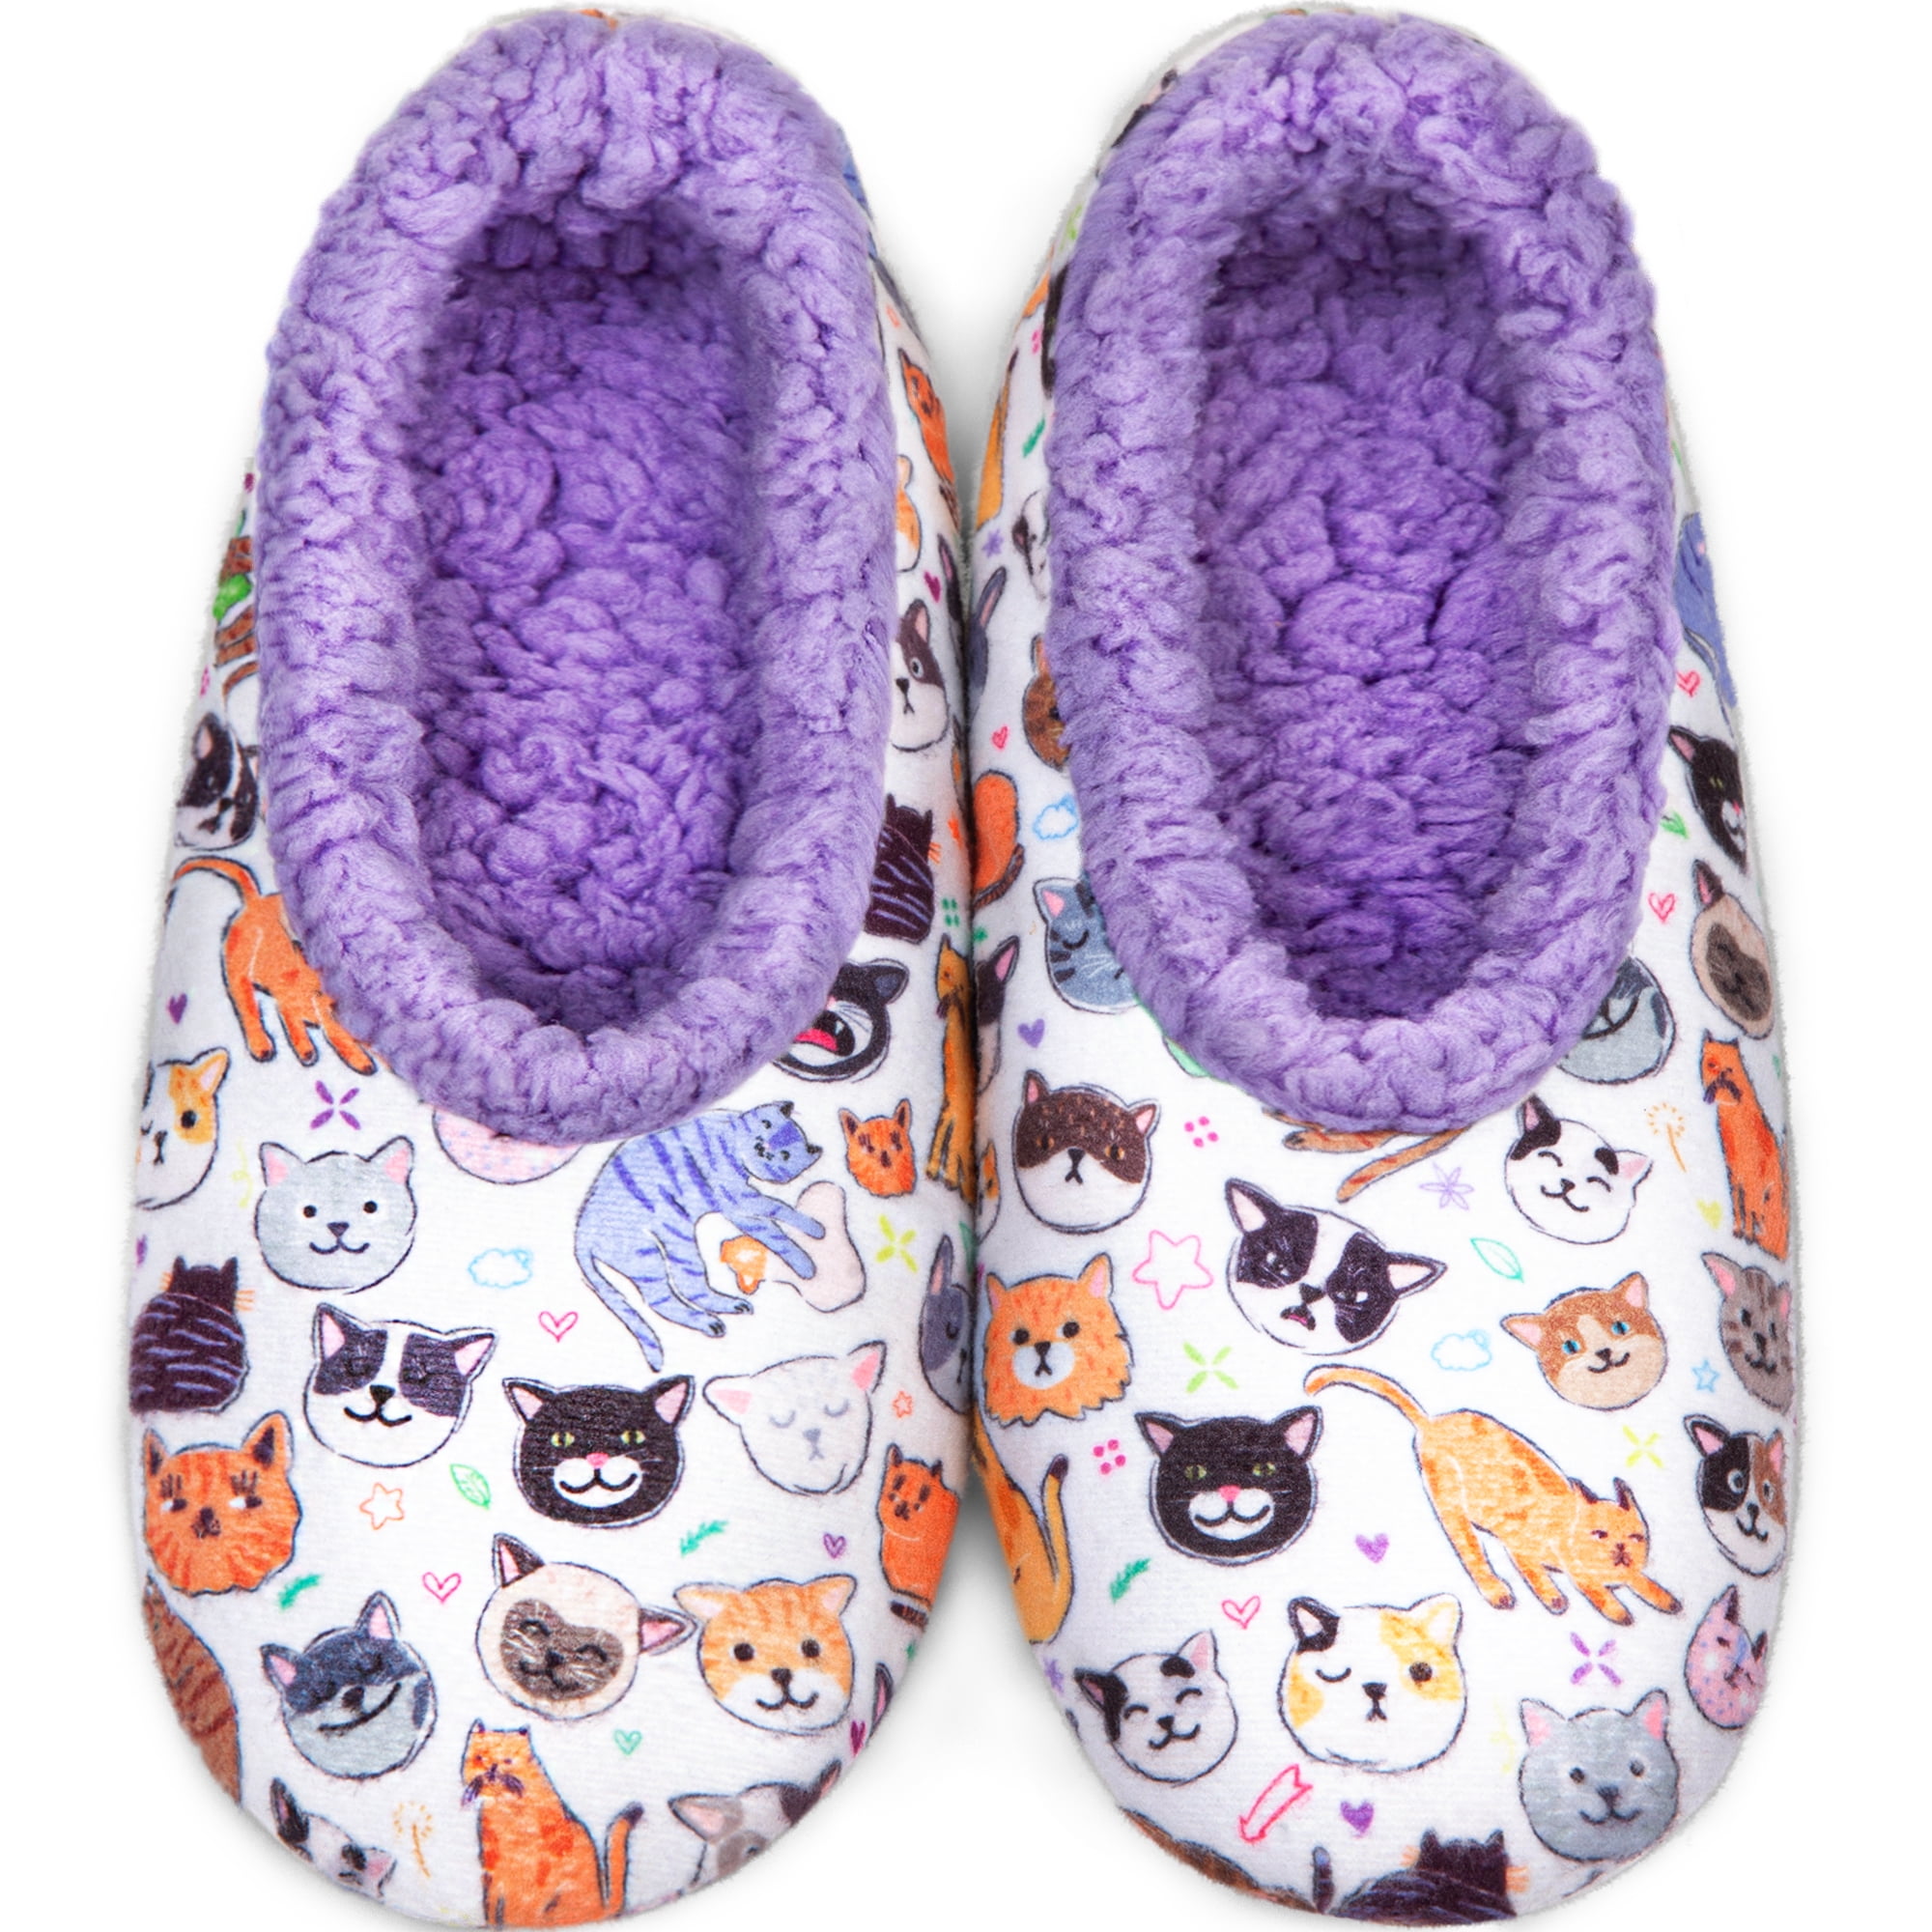 Fuzzy Animal Slippers for Women, Cute Animal House Shoes by -